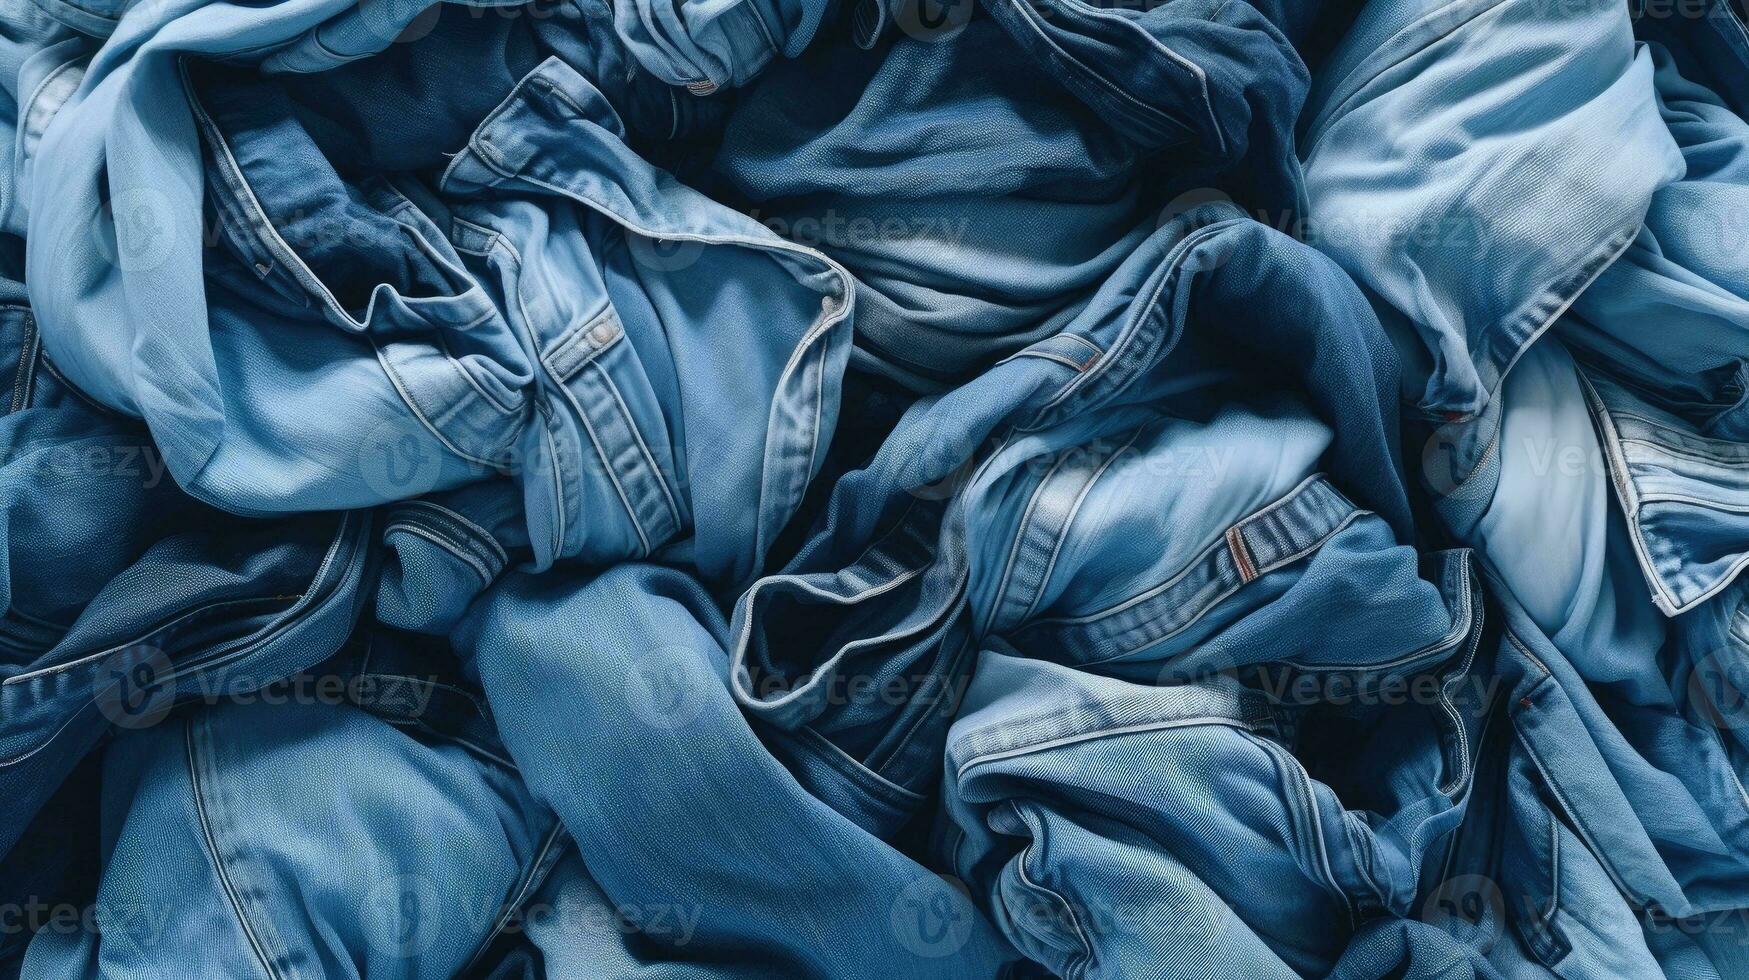 AI generated Assorted Denim Stack - Top View of Crumpled Blue Jeans as Background. Fashion Display with Textured Folded Denim Variety. Clothing Selection and Texture Concept for Design and Marketing photo